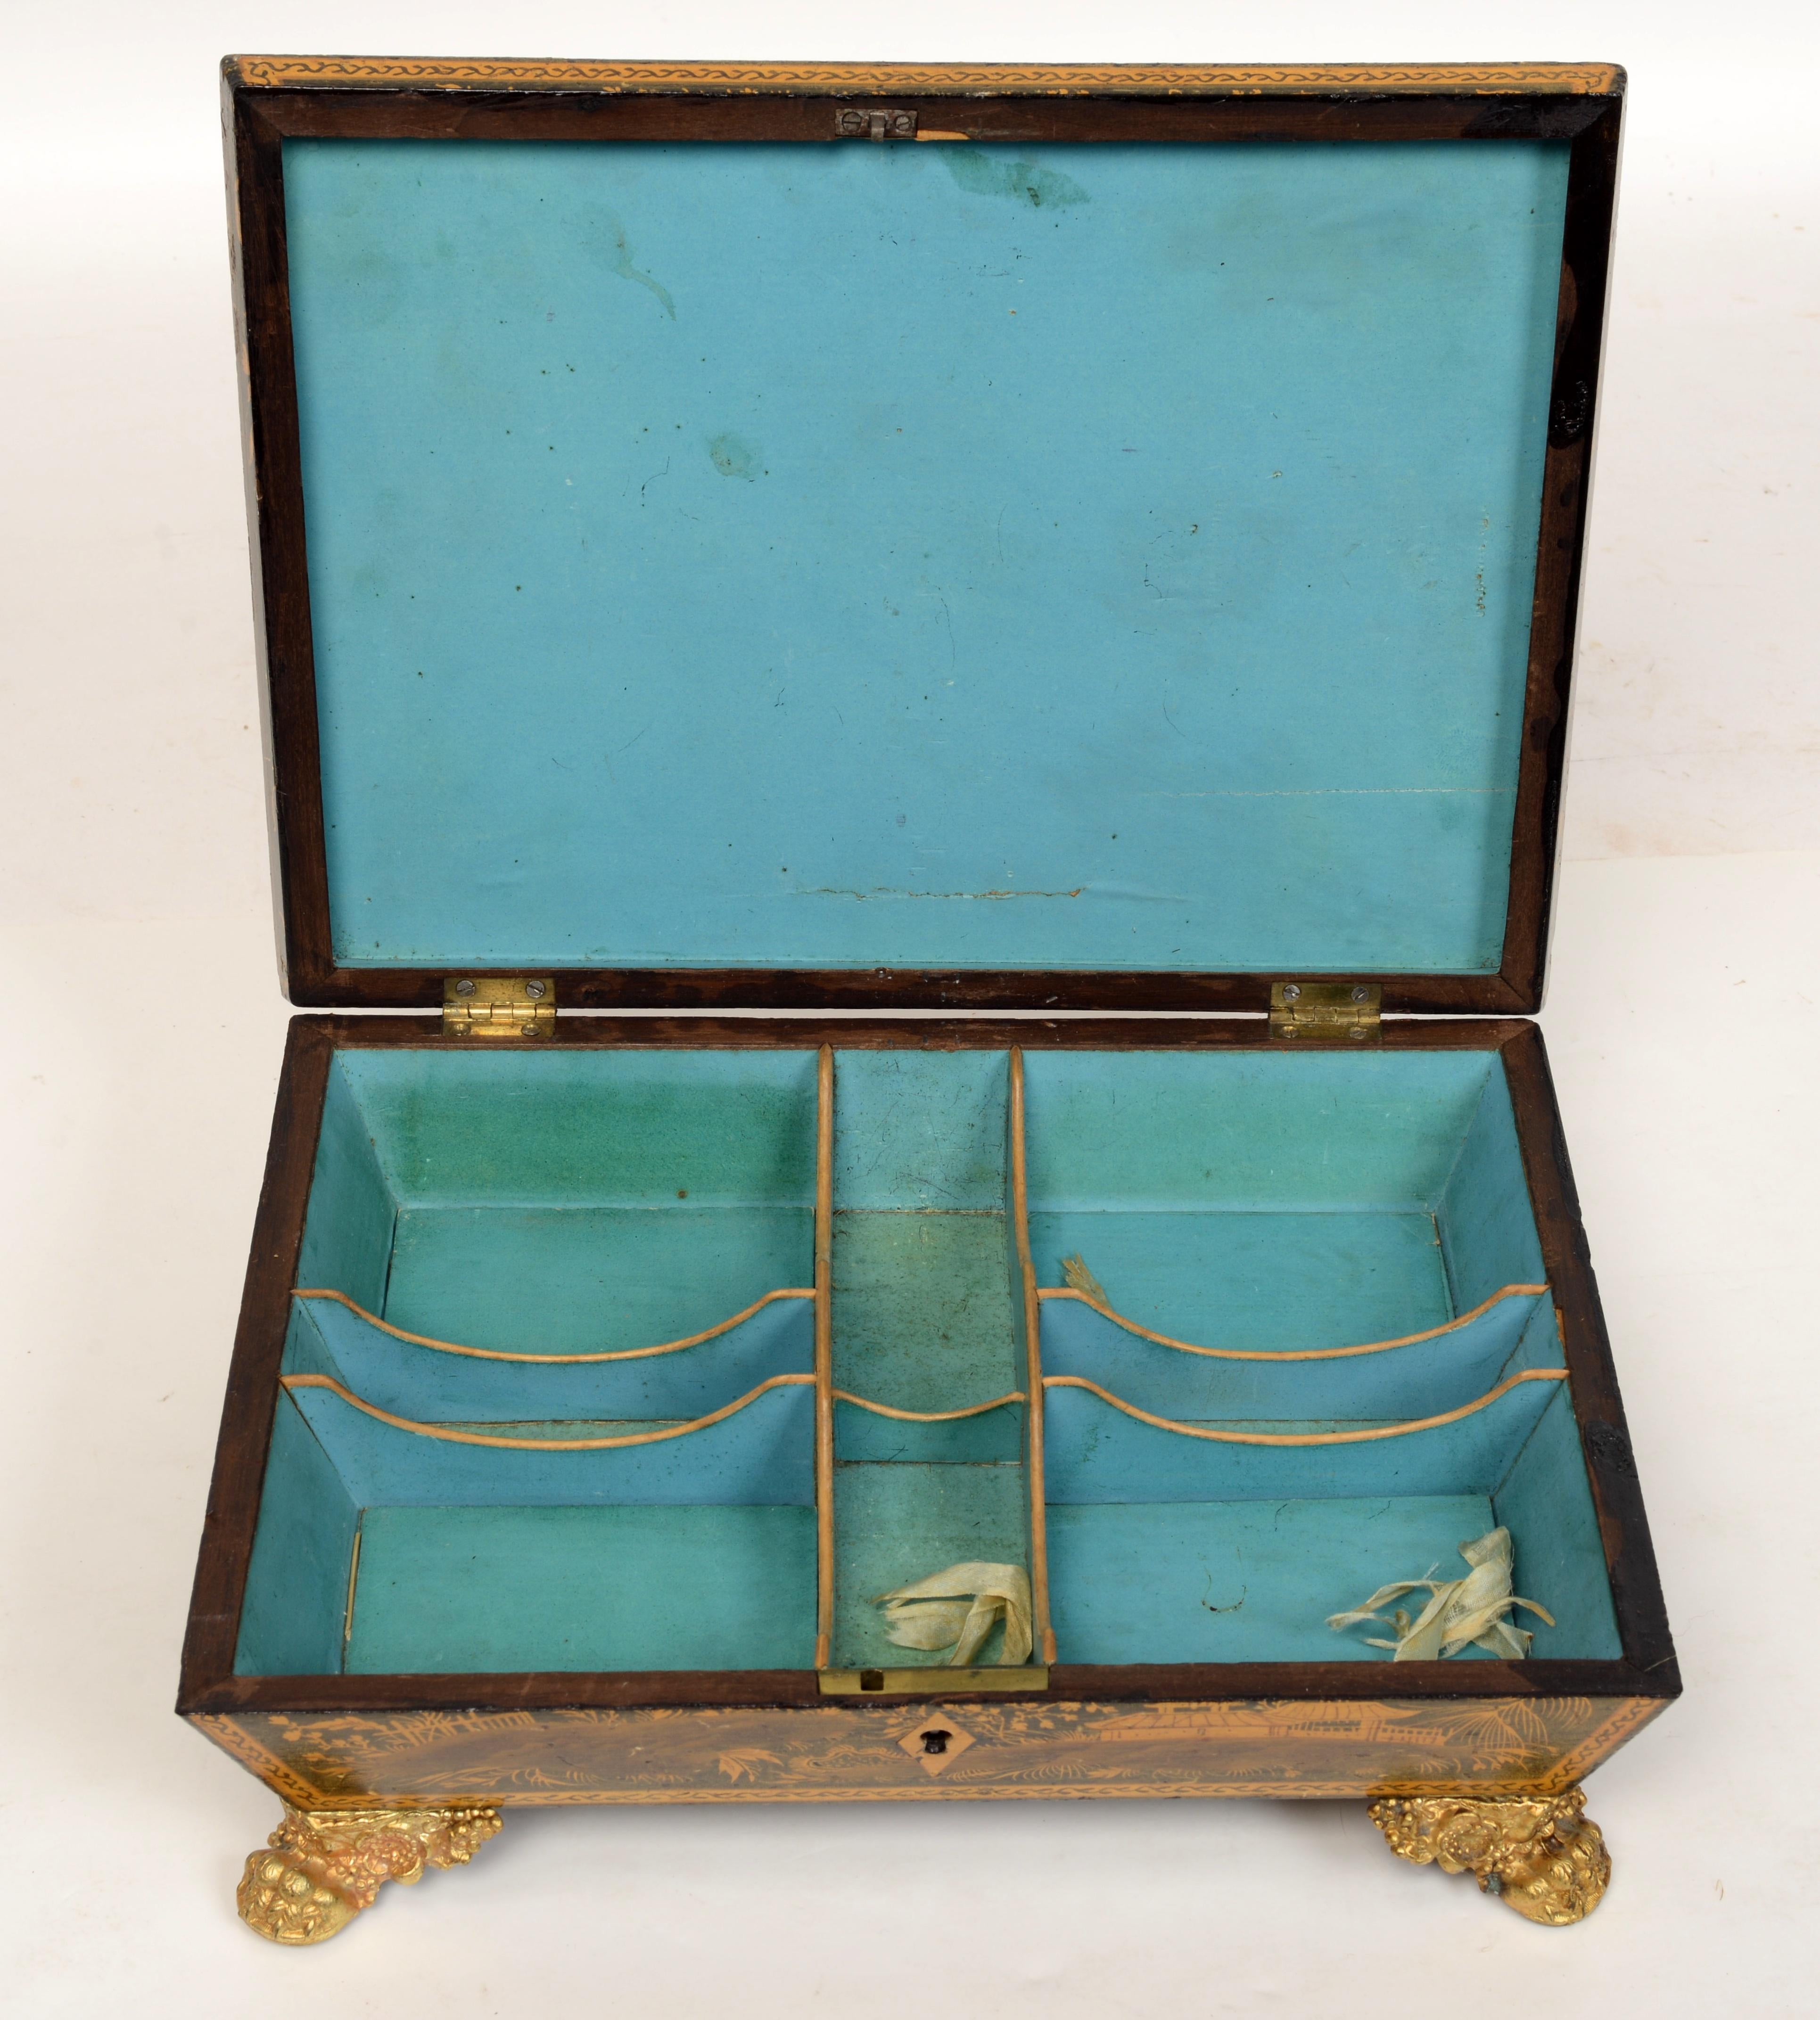 Regency Chinoiserie & Penwork Decorated Jewelry Box Blue Painted Fitted Interior For Sale 5